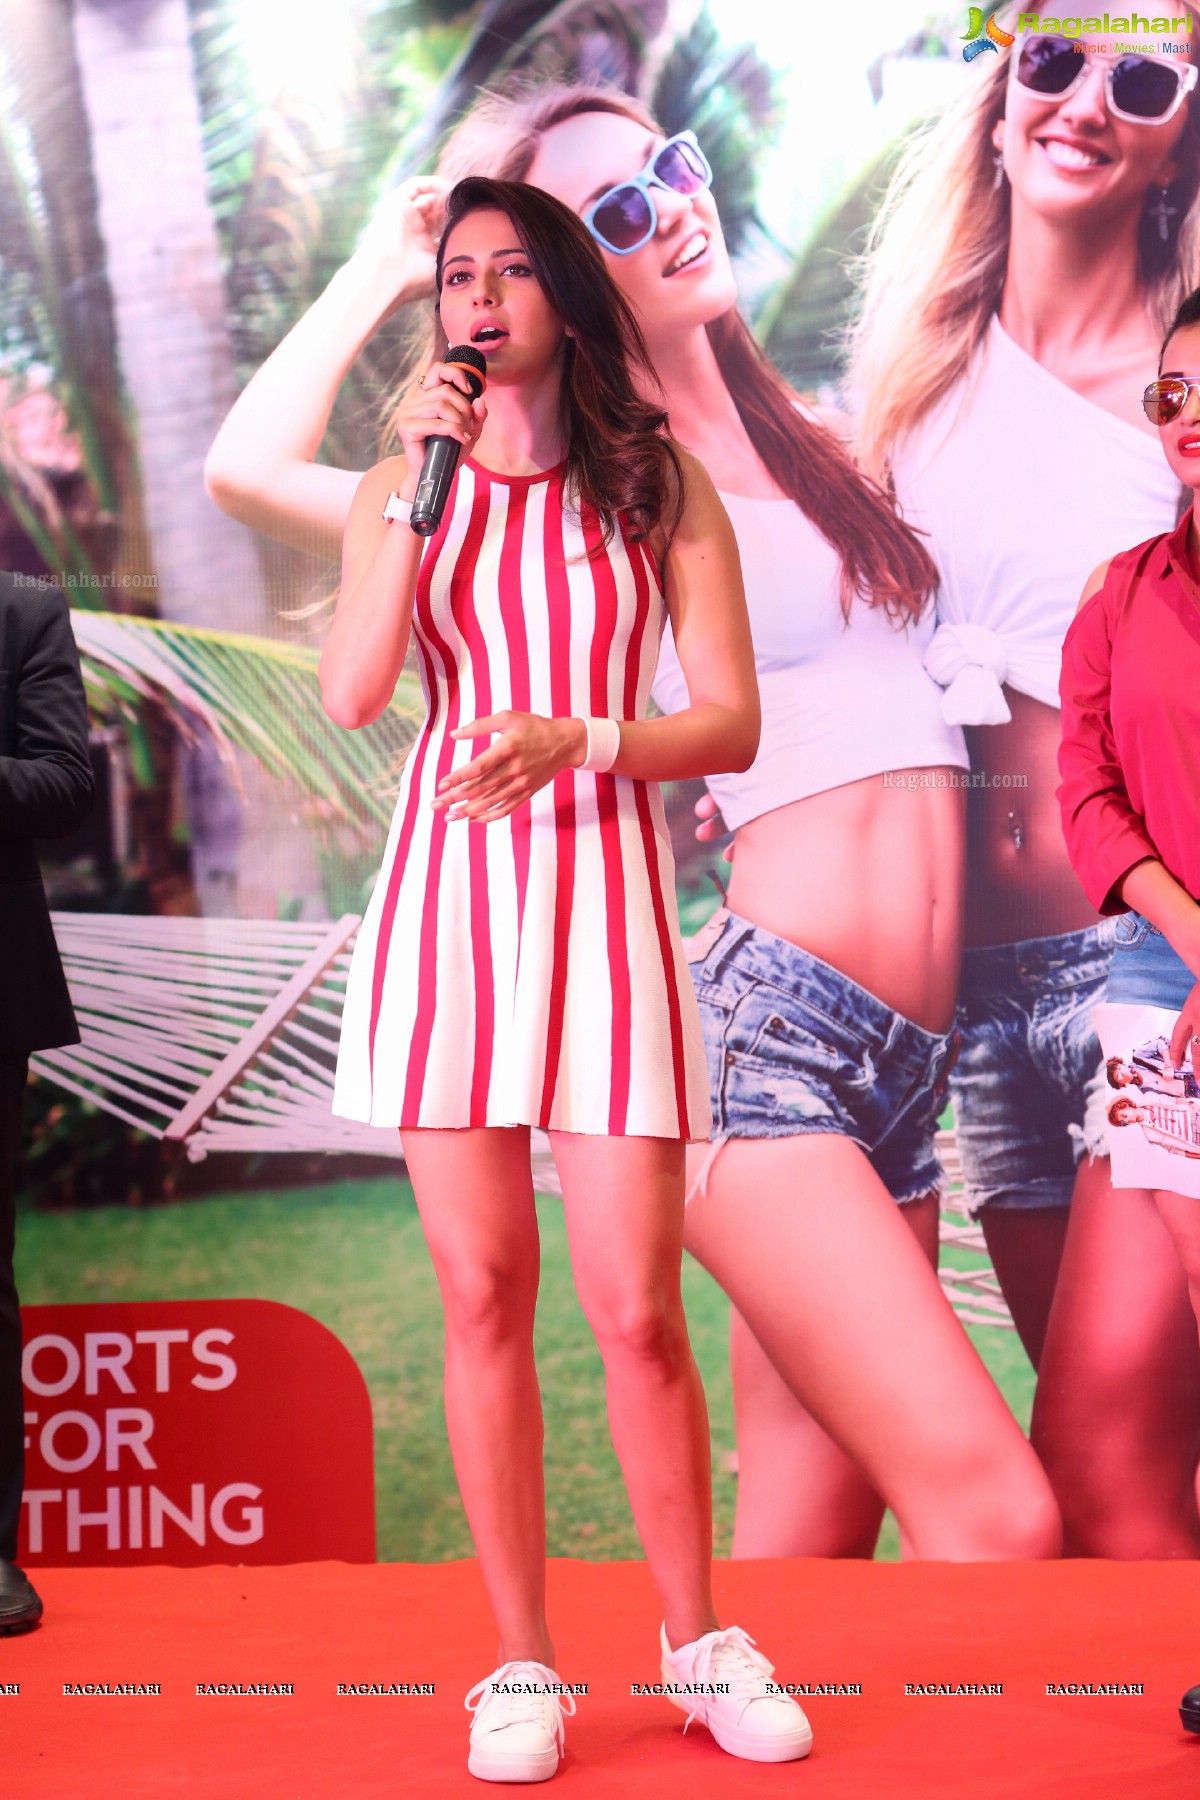 Launch of #strip To Shorts Campaign by Rakul Preet Singh at Central